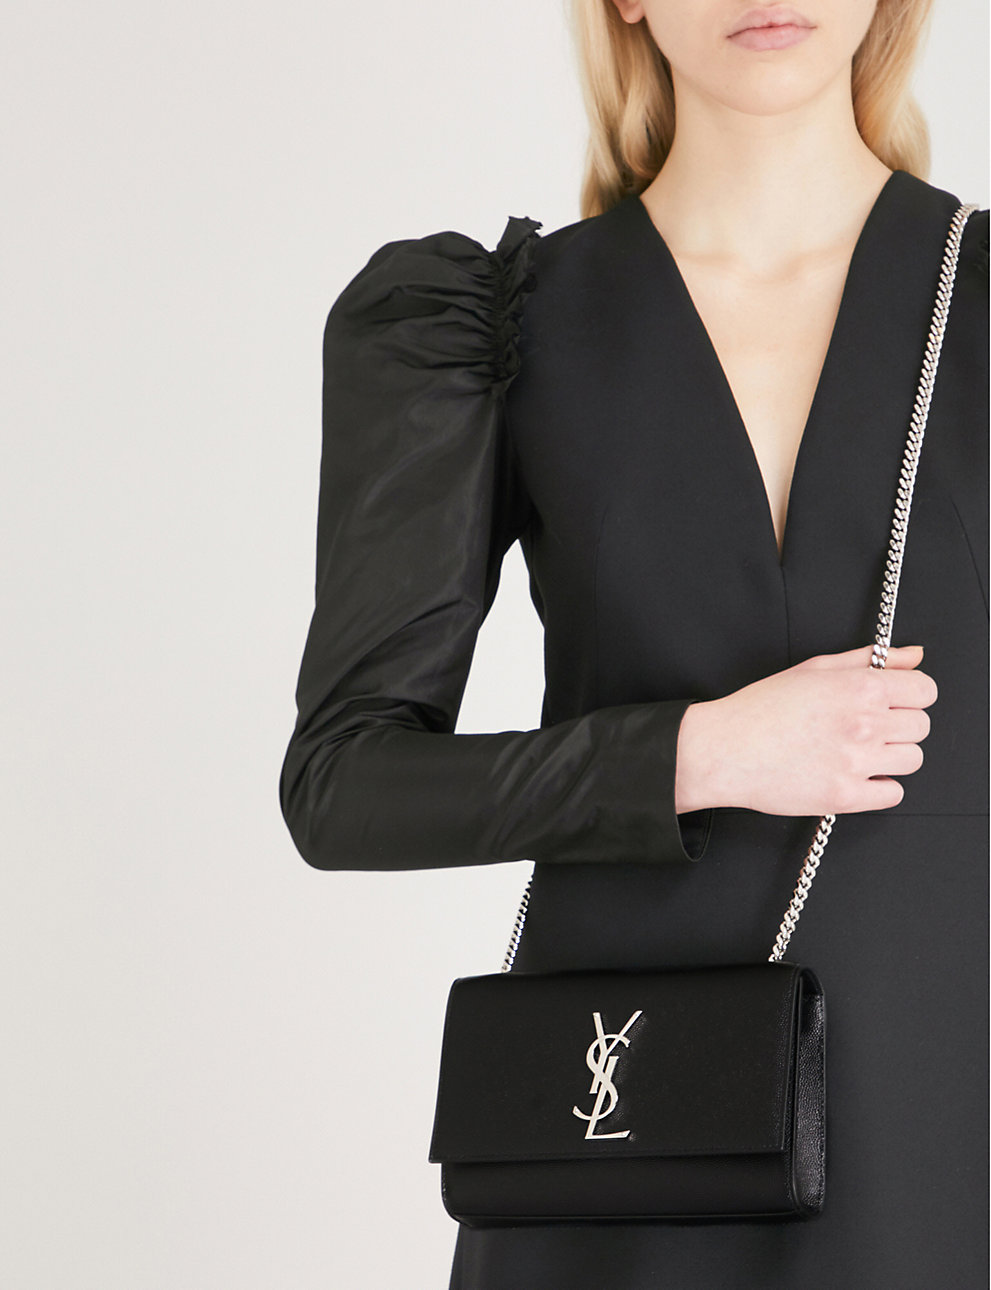 BAG REVIEW  Saint Laurent Large Kate in the black leather with